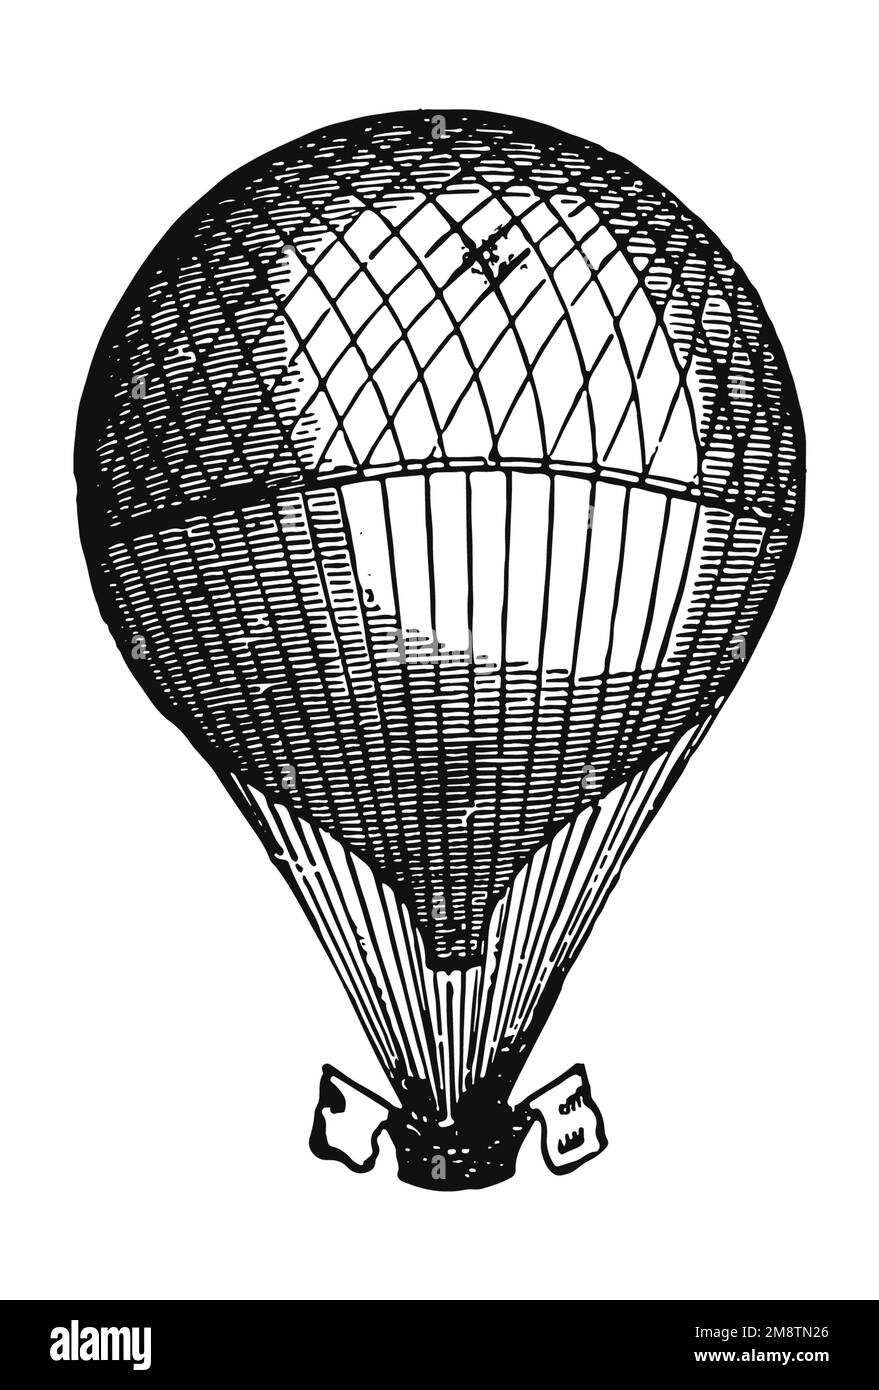 Hot air balloon drawing Black and White Stock Photos & Images - Alamy